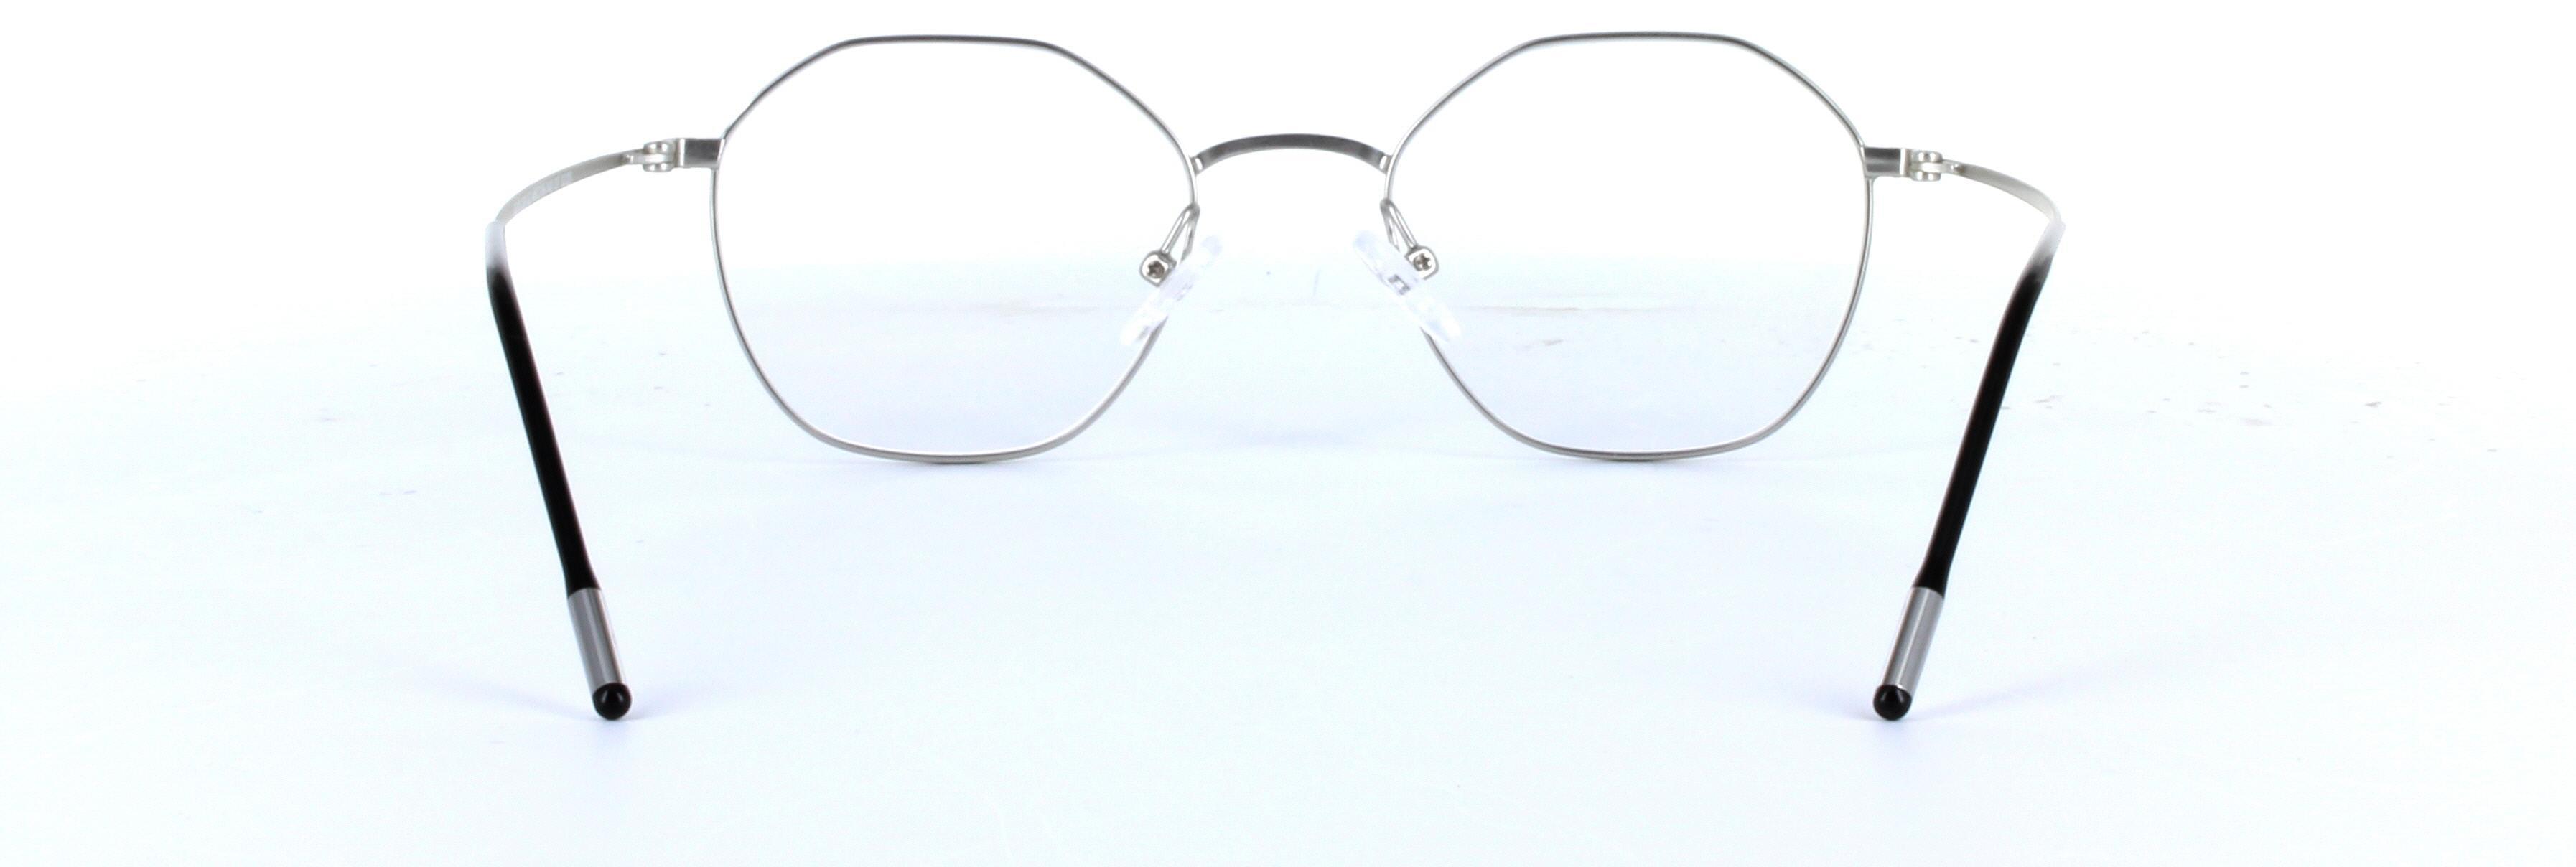 Maiver Silver and Black Full Rim Round Metal Glasses - Image View 3